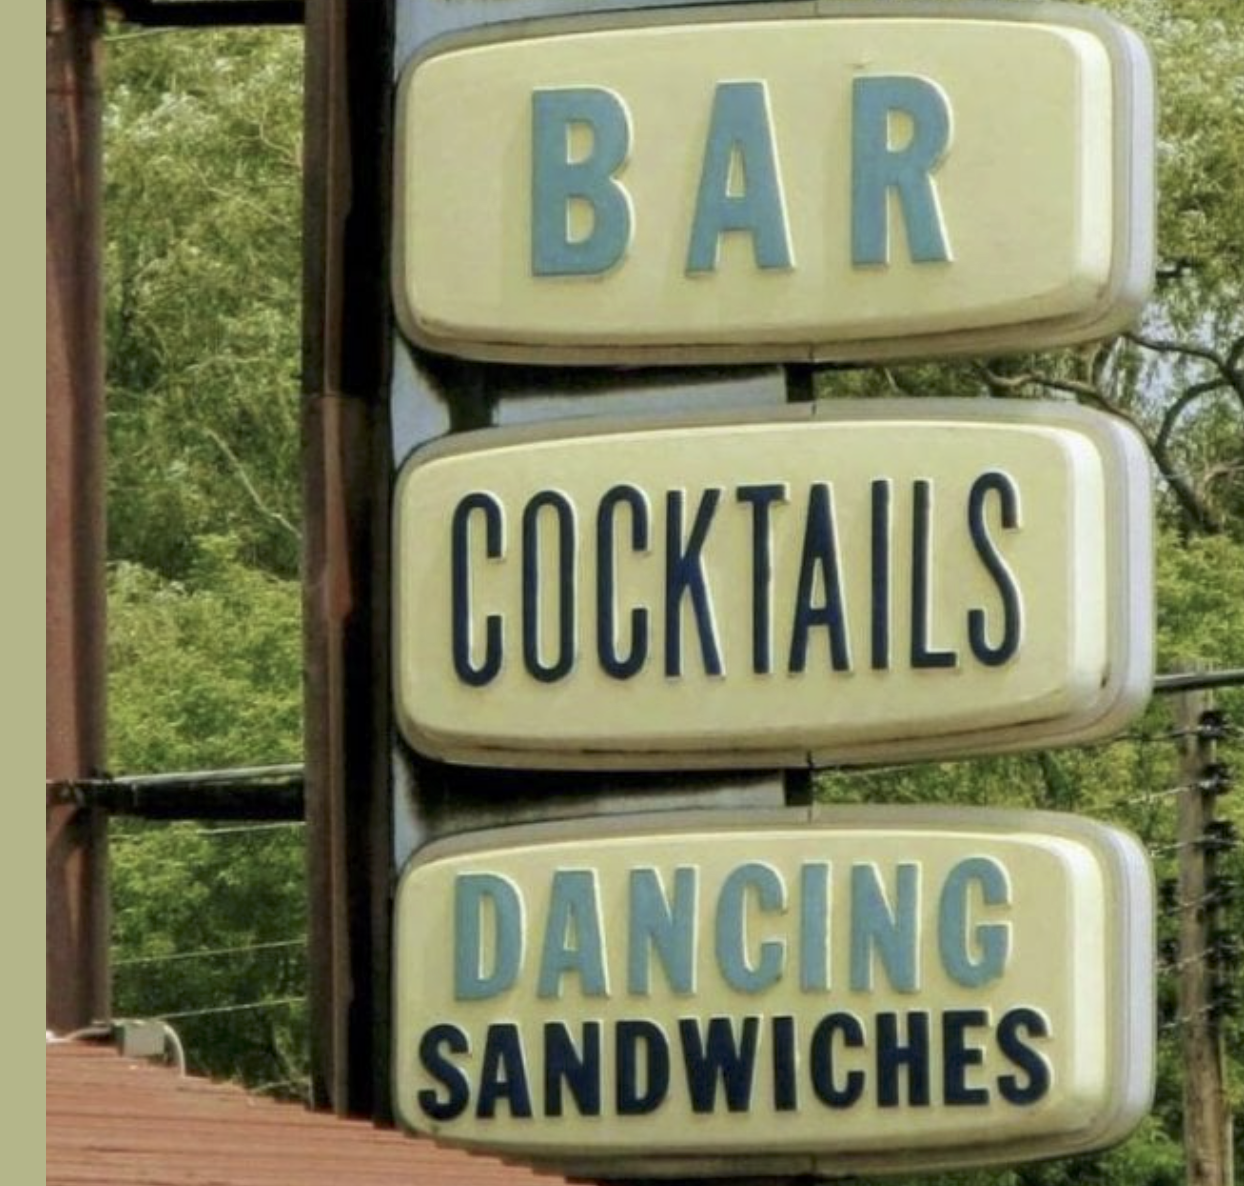 Come for the drinks... Stay for the dancing sandwiches.